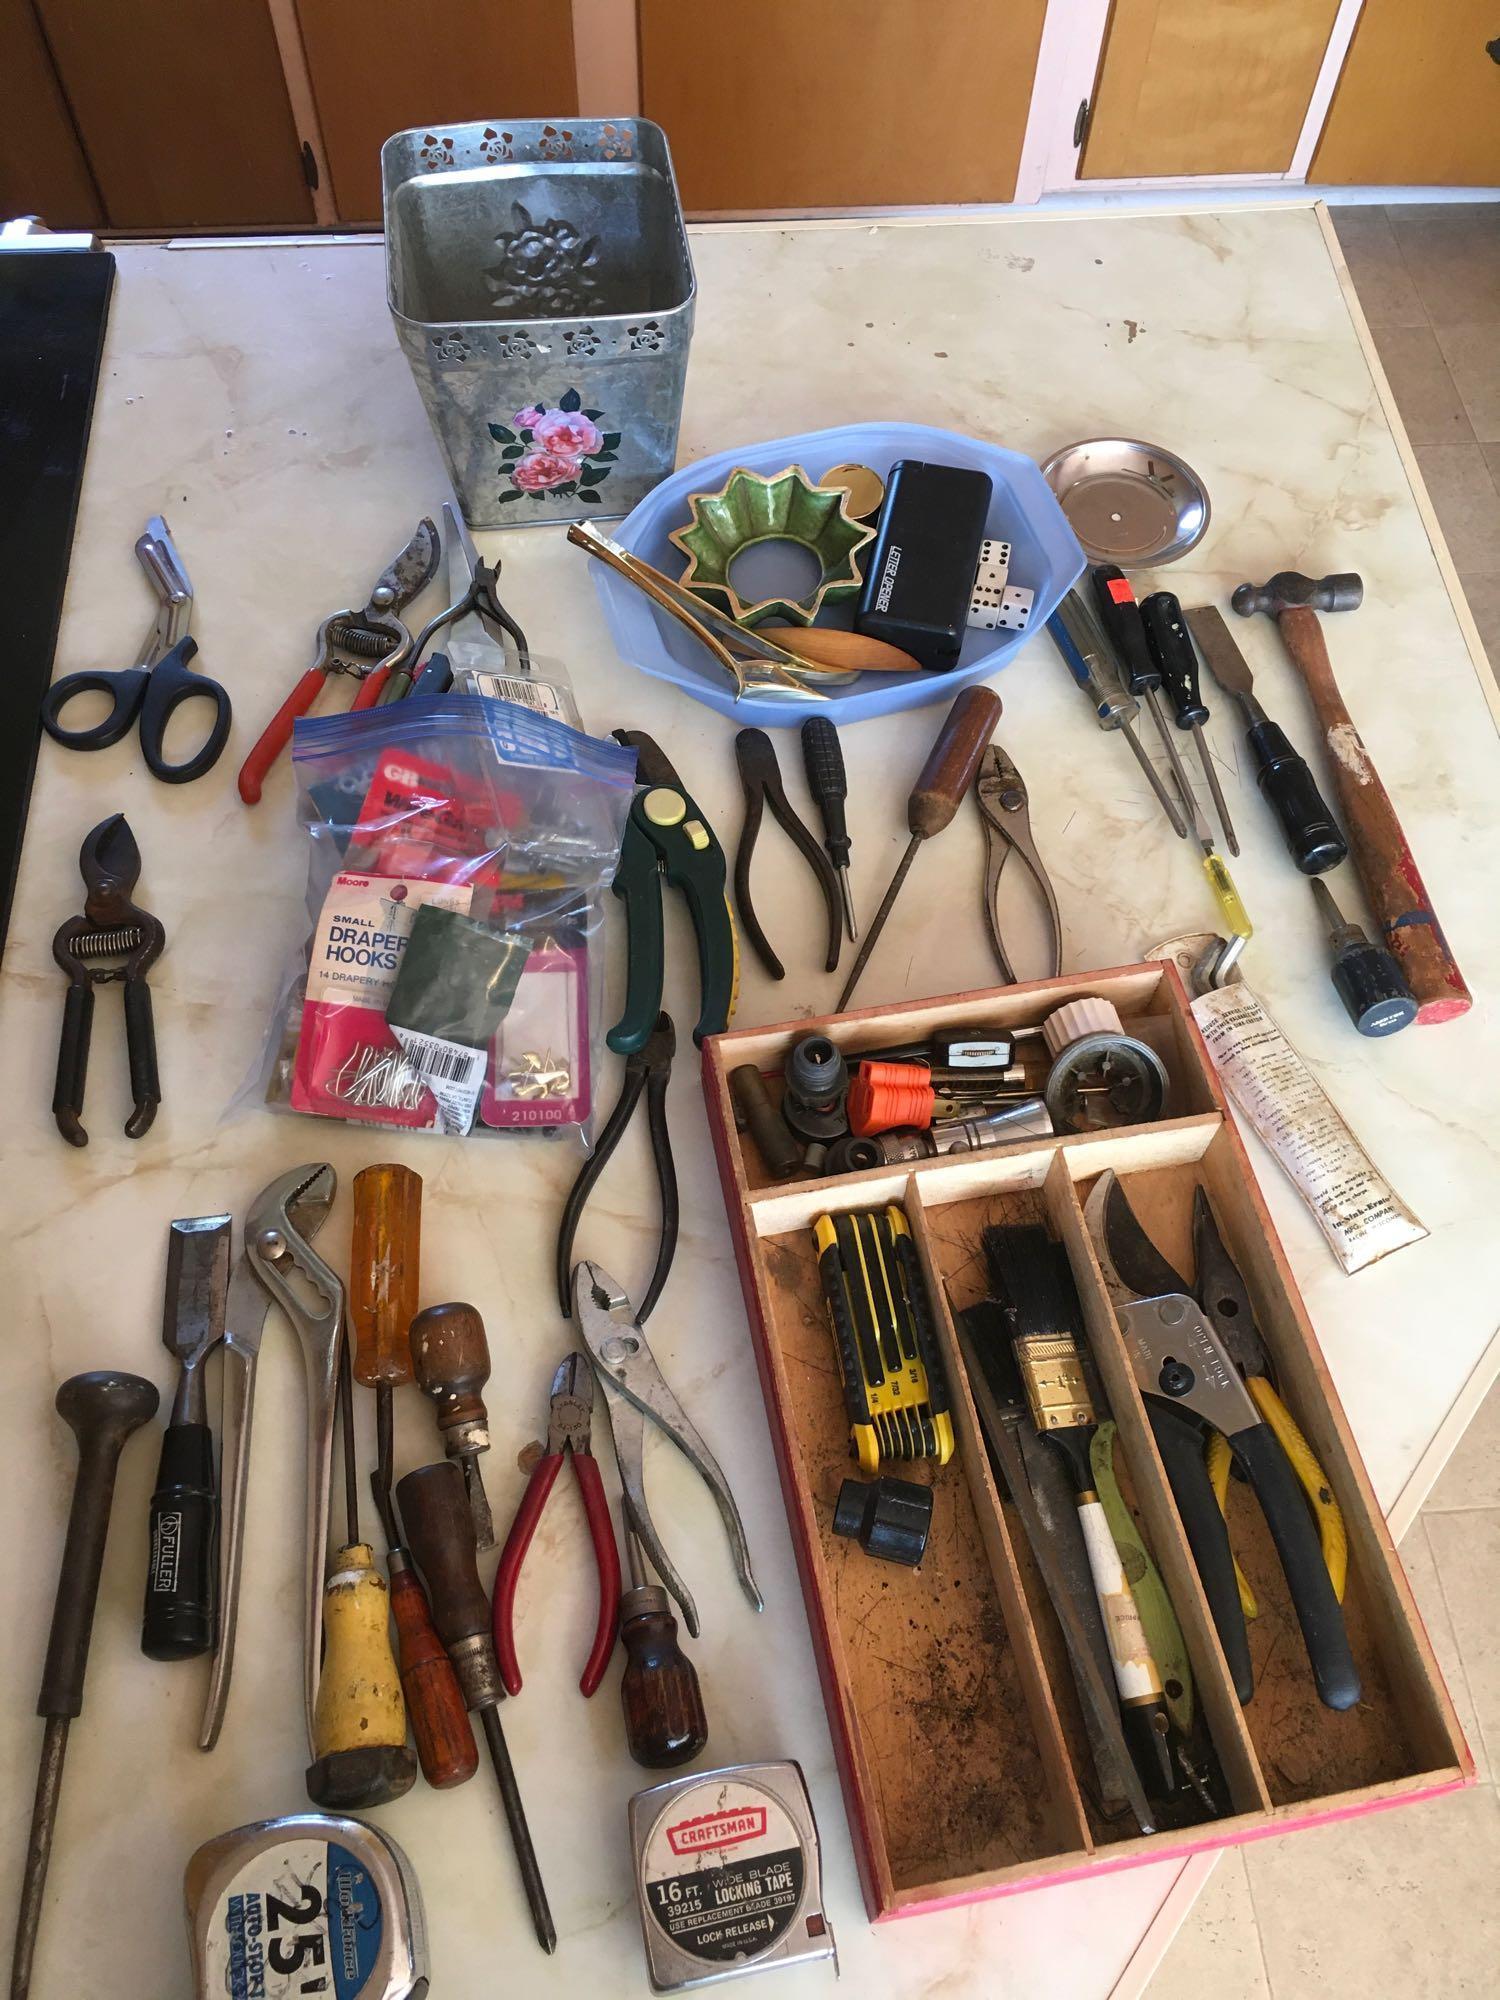 Lot. Assorted gardening tools, tools, measuring tapes, files, electrical accessories, etc